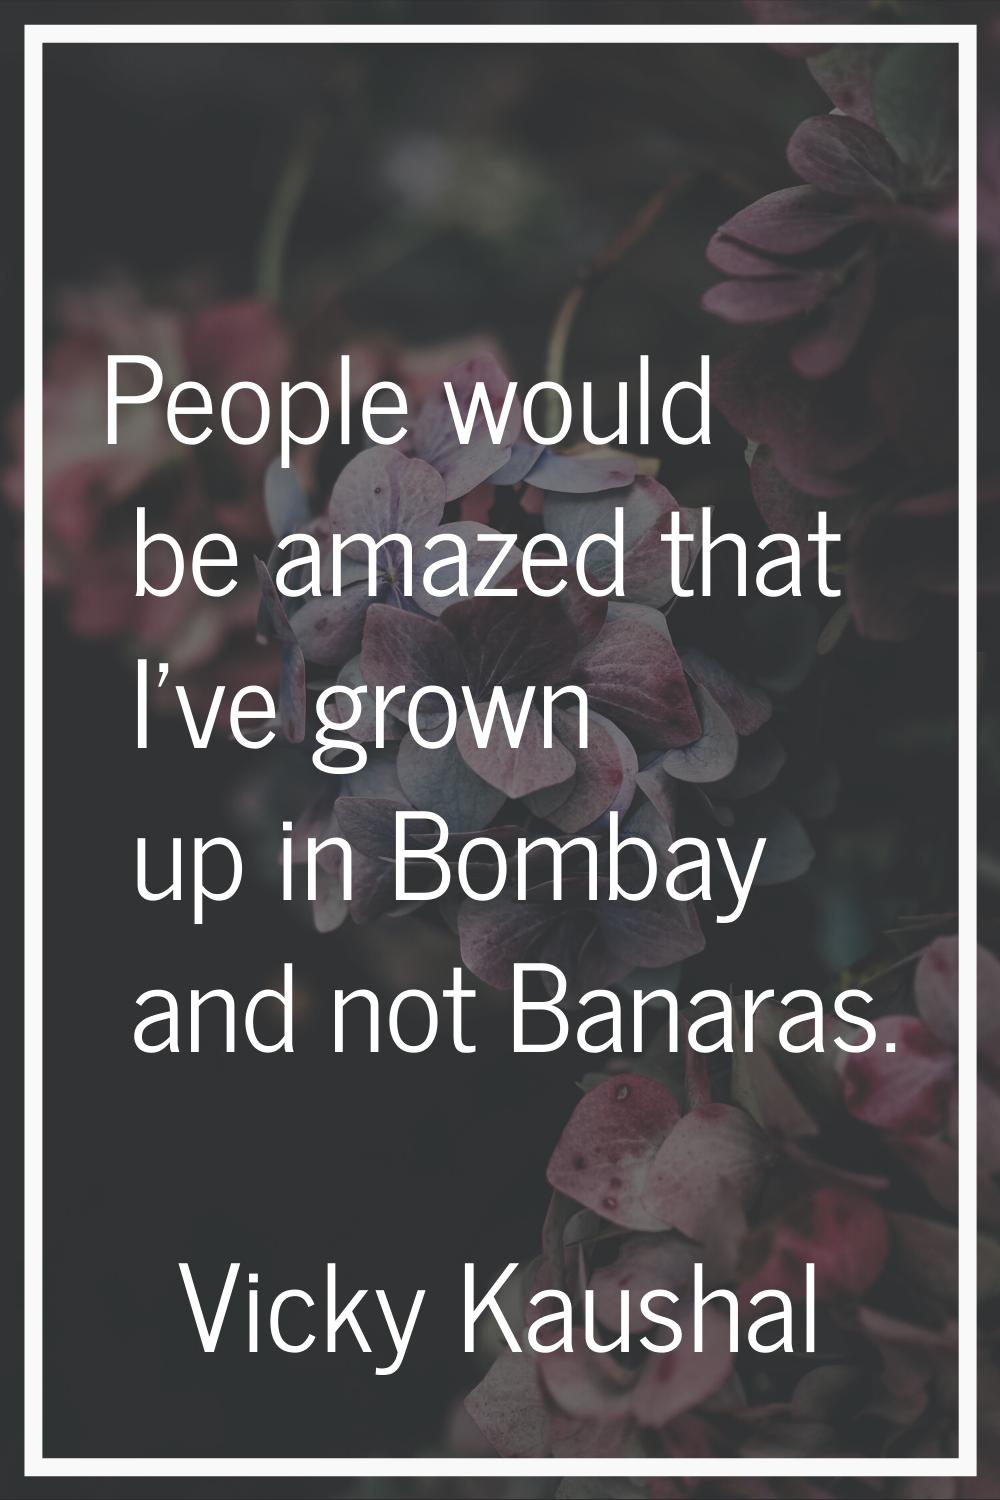 People would be amazed that I've grown up in Bombay and not Banaras.